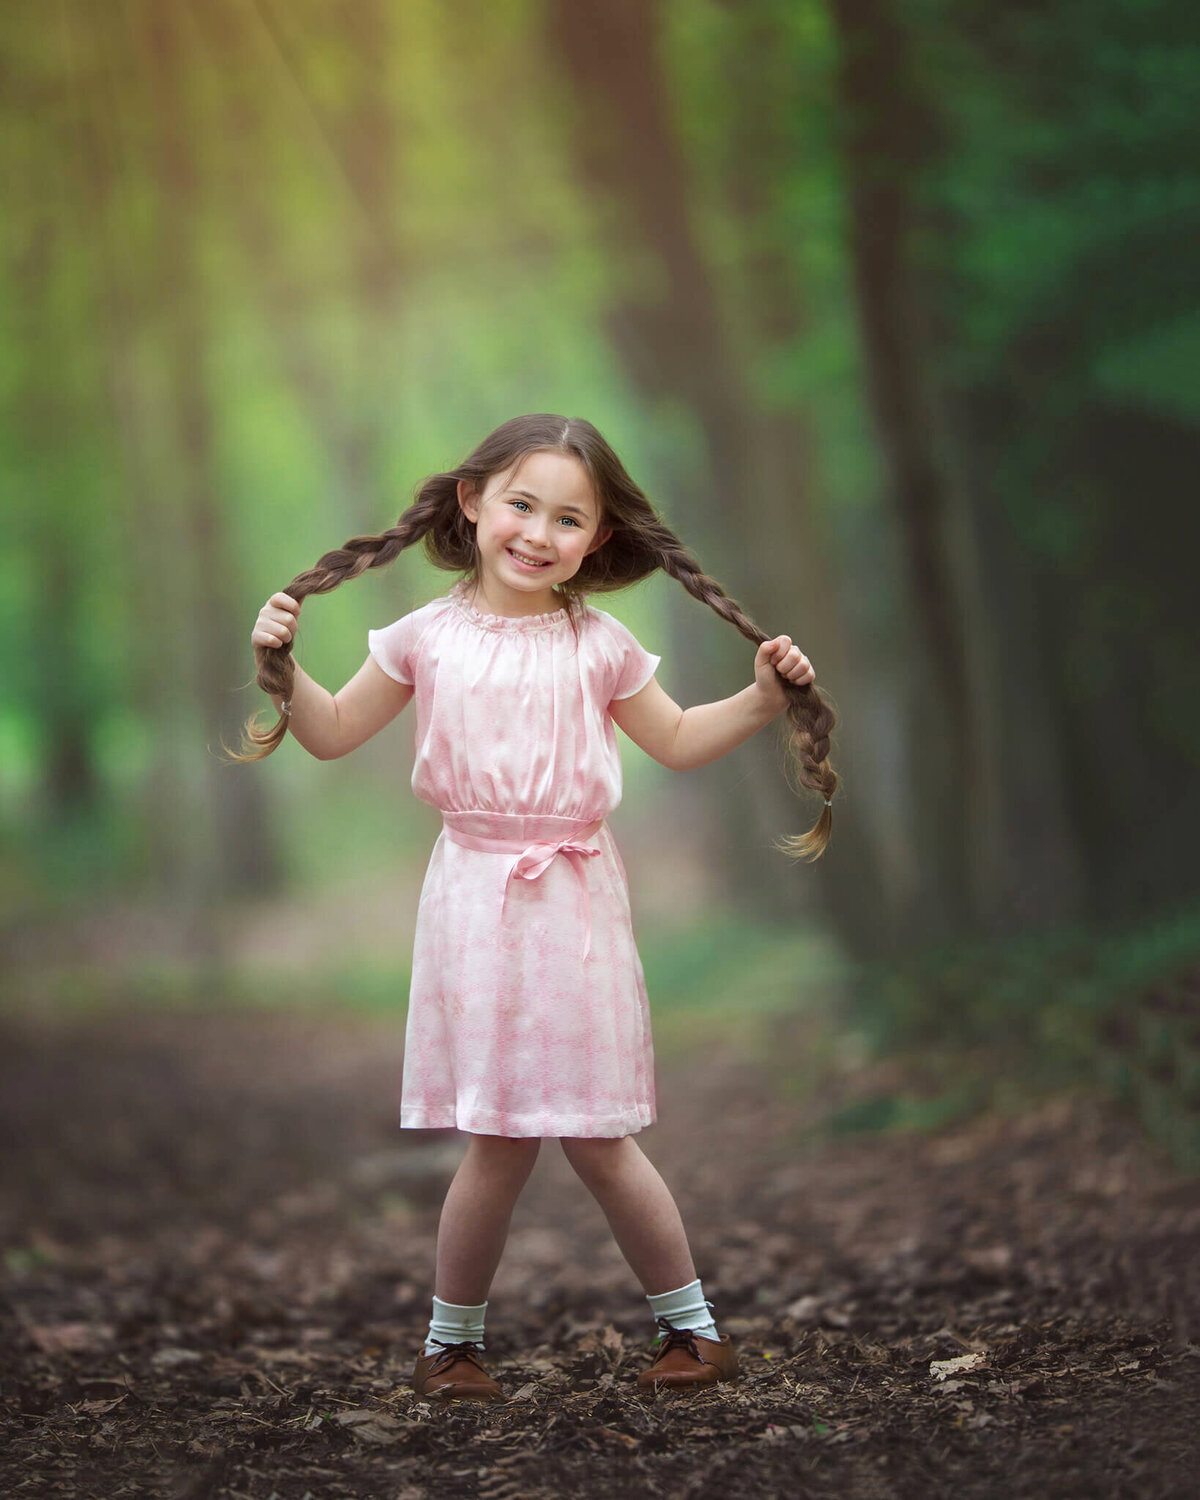 Little girl holding her pigtails in the park - Los Angeles Children’s Photographer